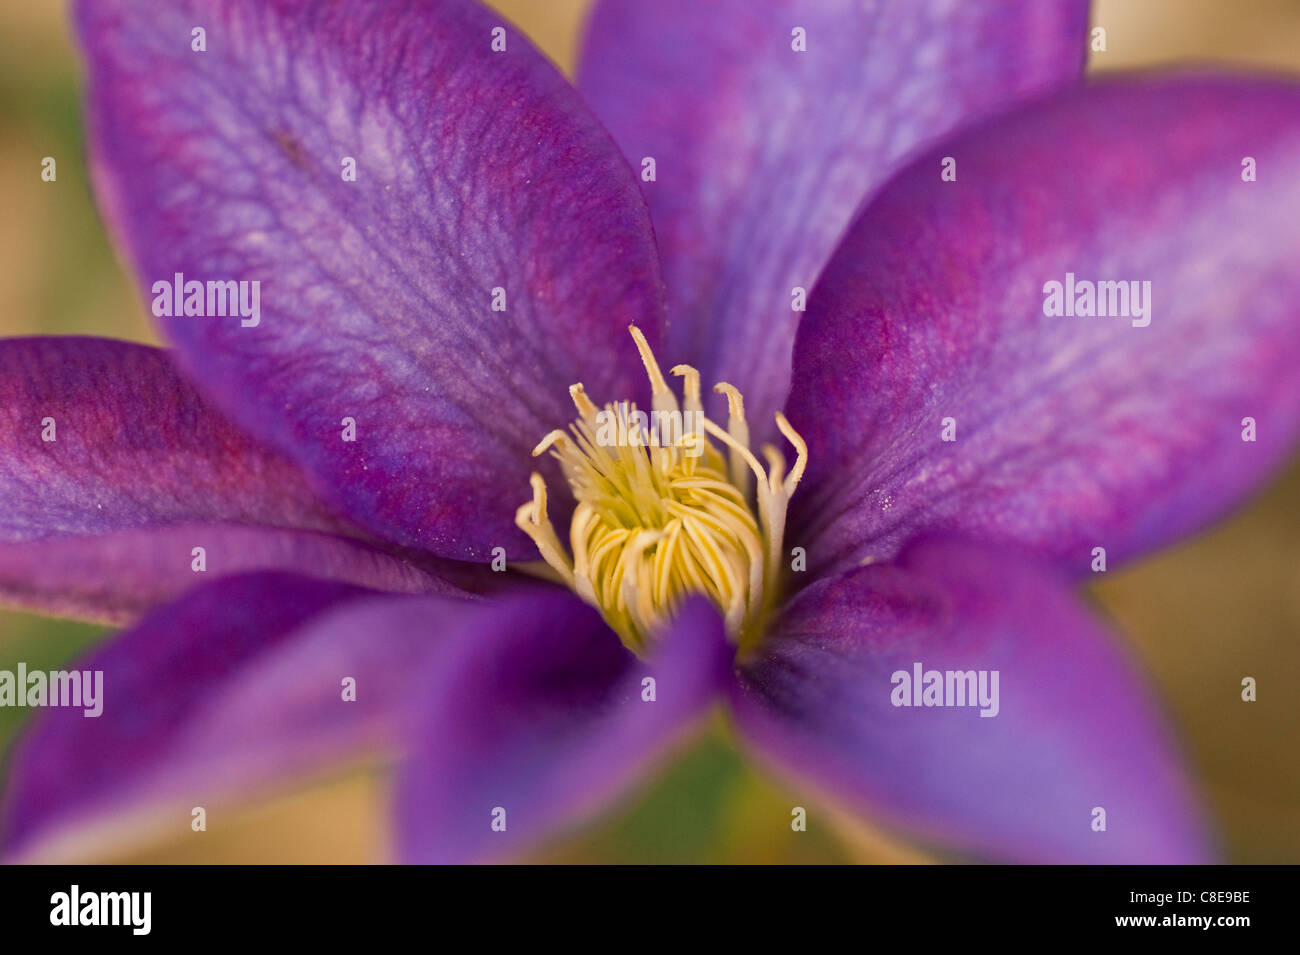 Purple Clematis flower close up. Stock Photo